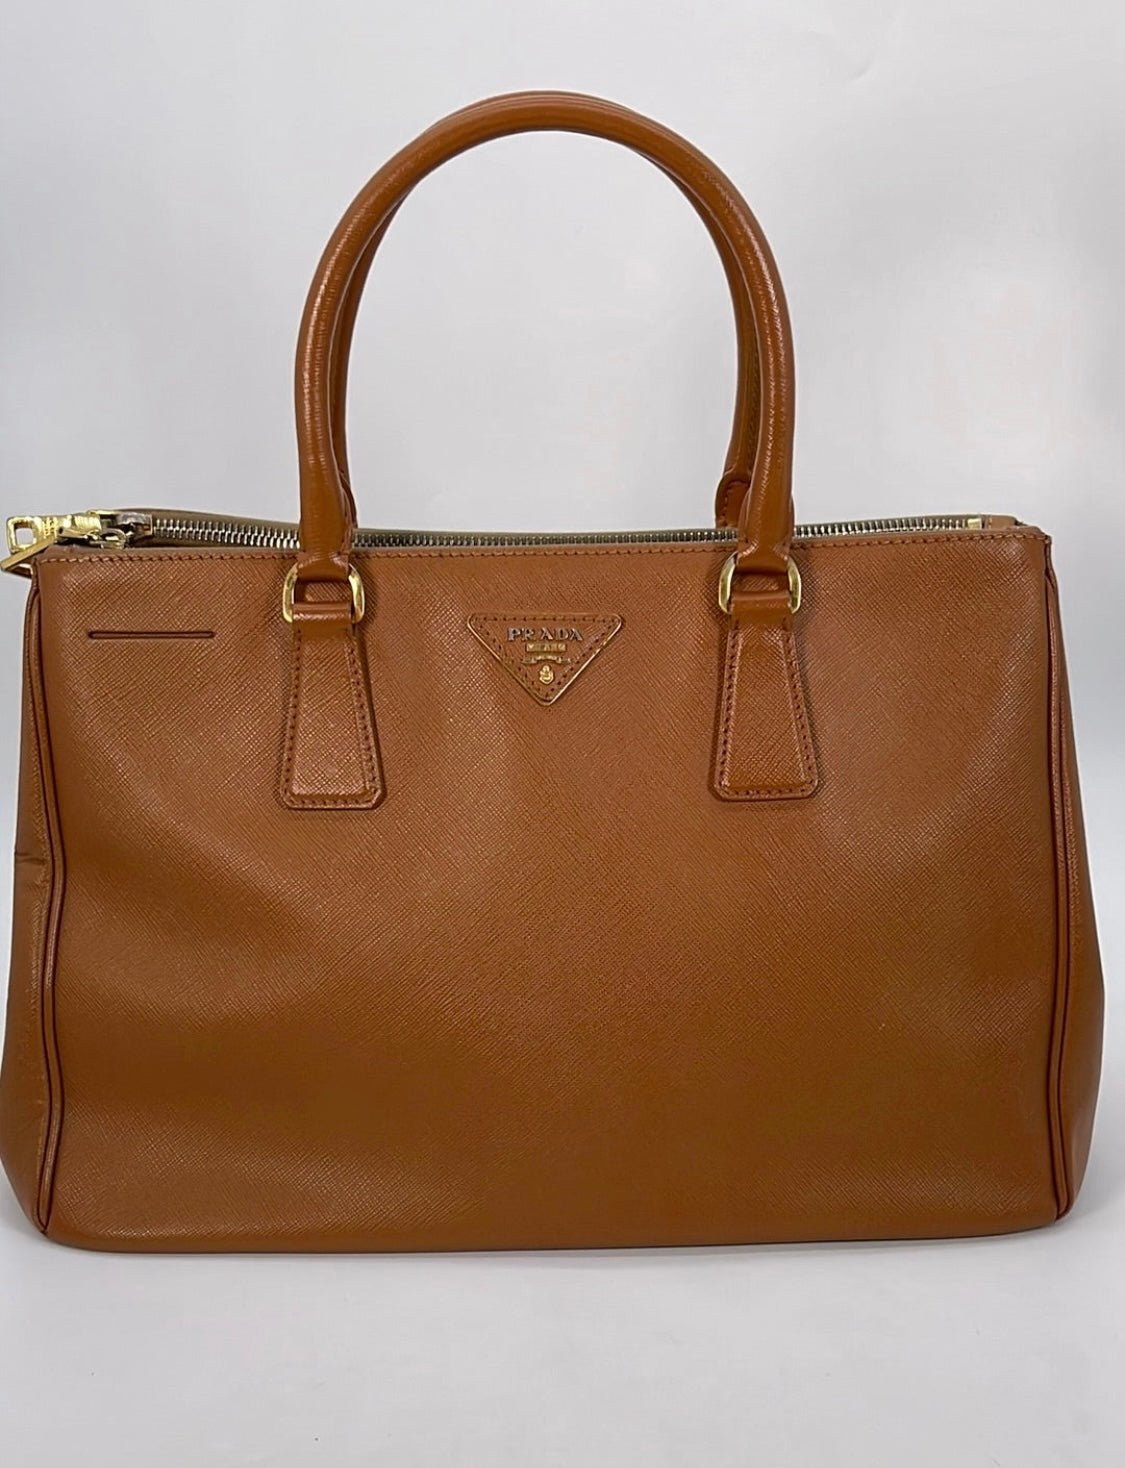 Preloved Prada Brown Saffiano Leather Double Zip Lux Tote Bag 25 03052 –  KimmieBBags LLC